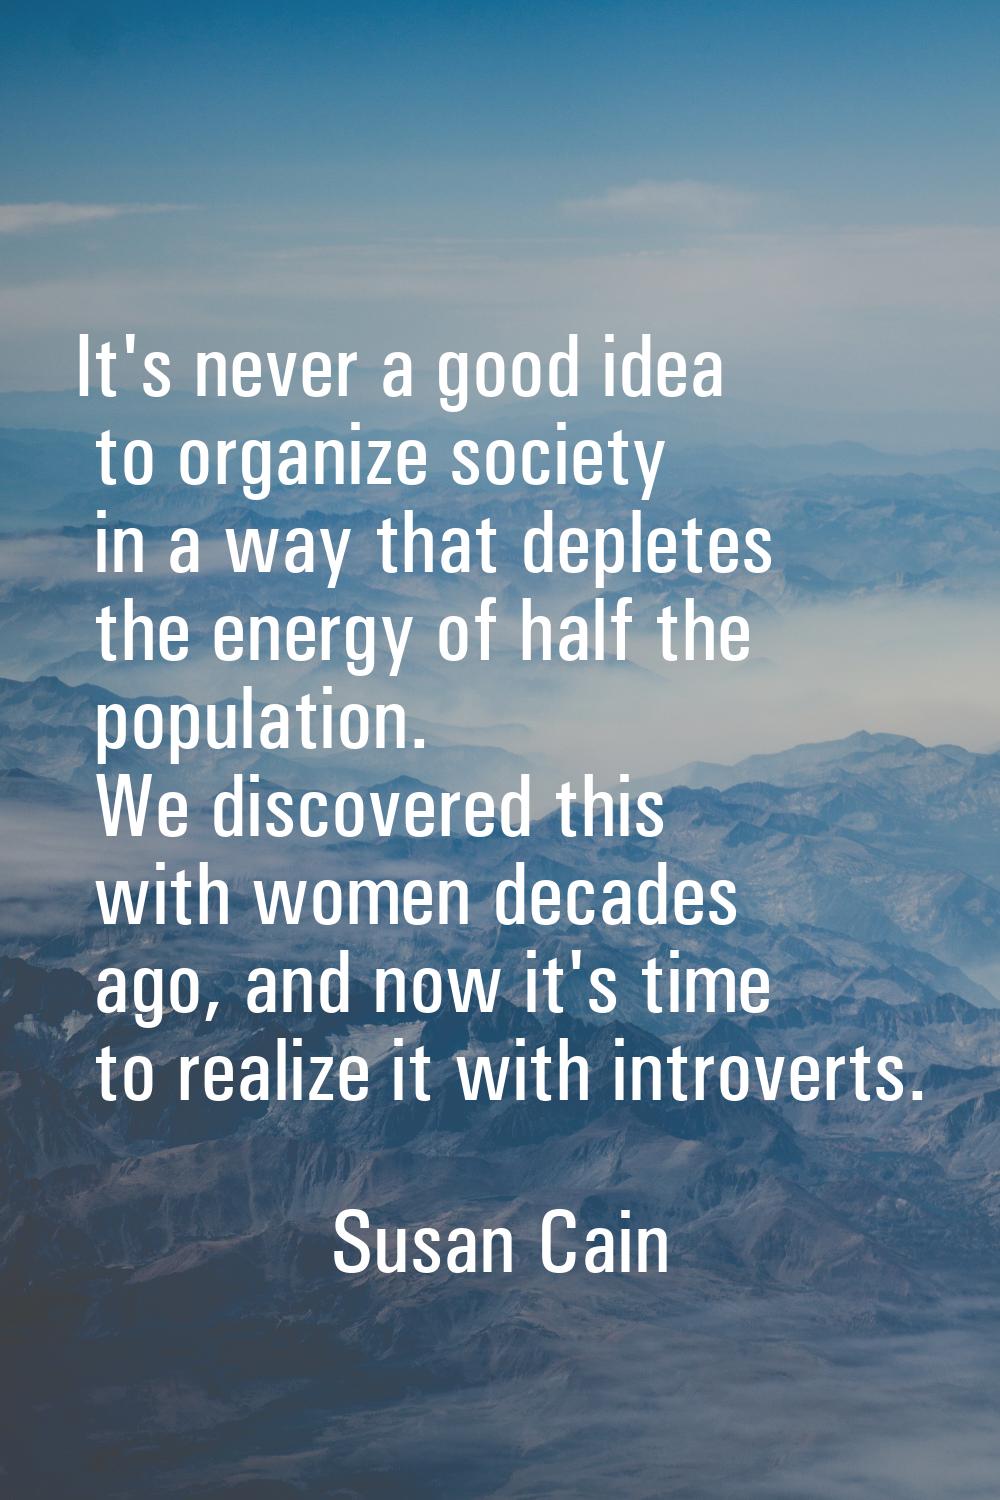 It's never a good idea to organize society in a way that depletes the energy of half the population